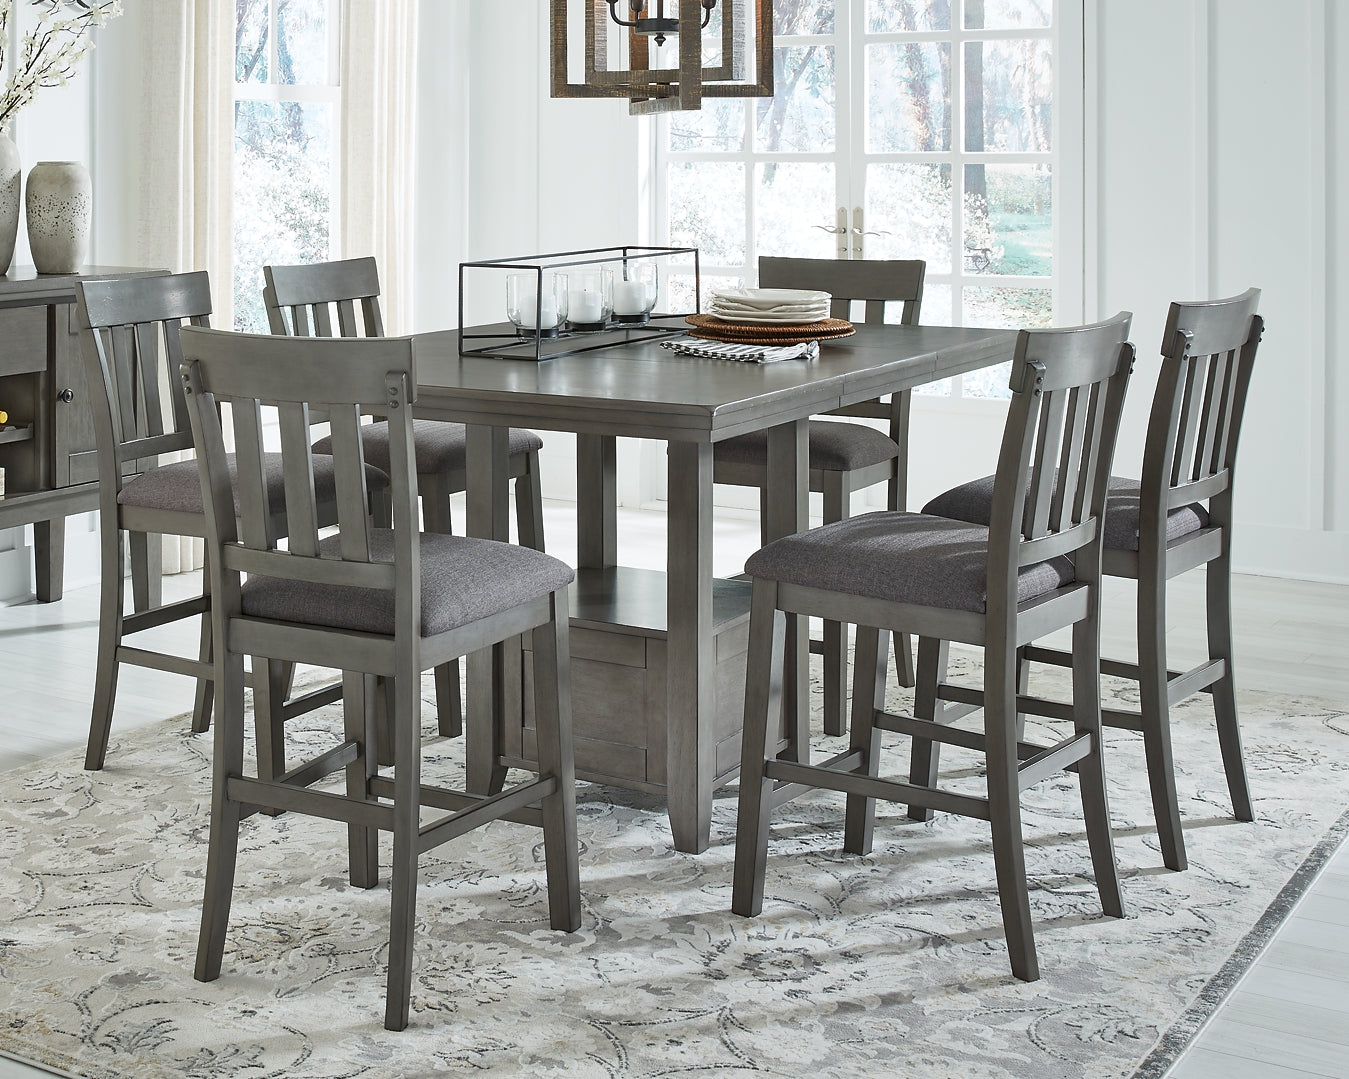 Hallanden Counter Height Dining Table and 6 Barstools